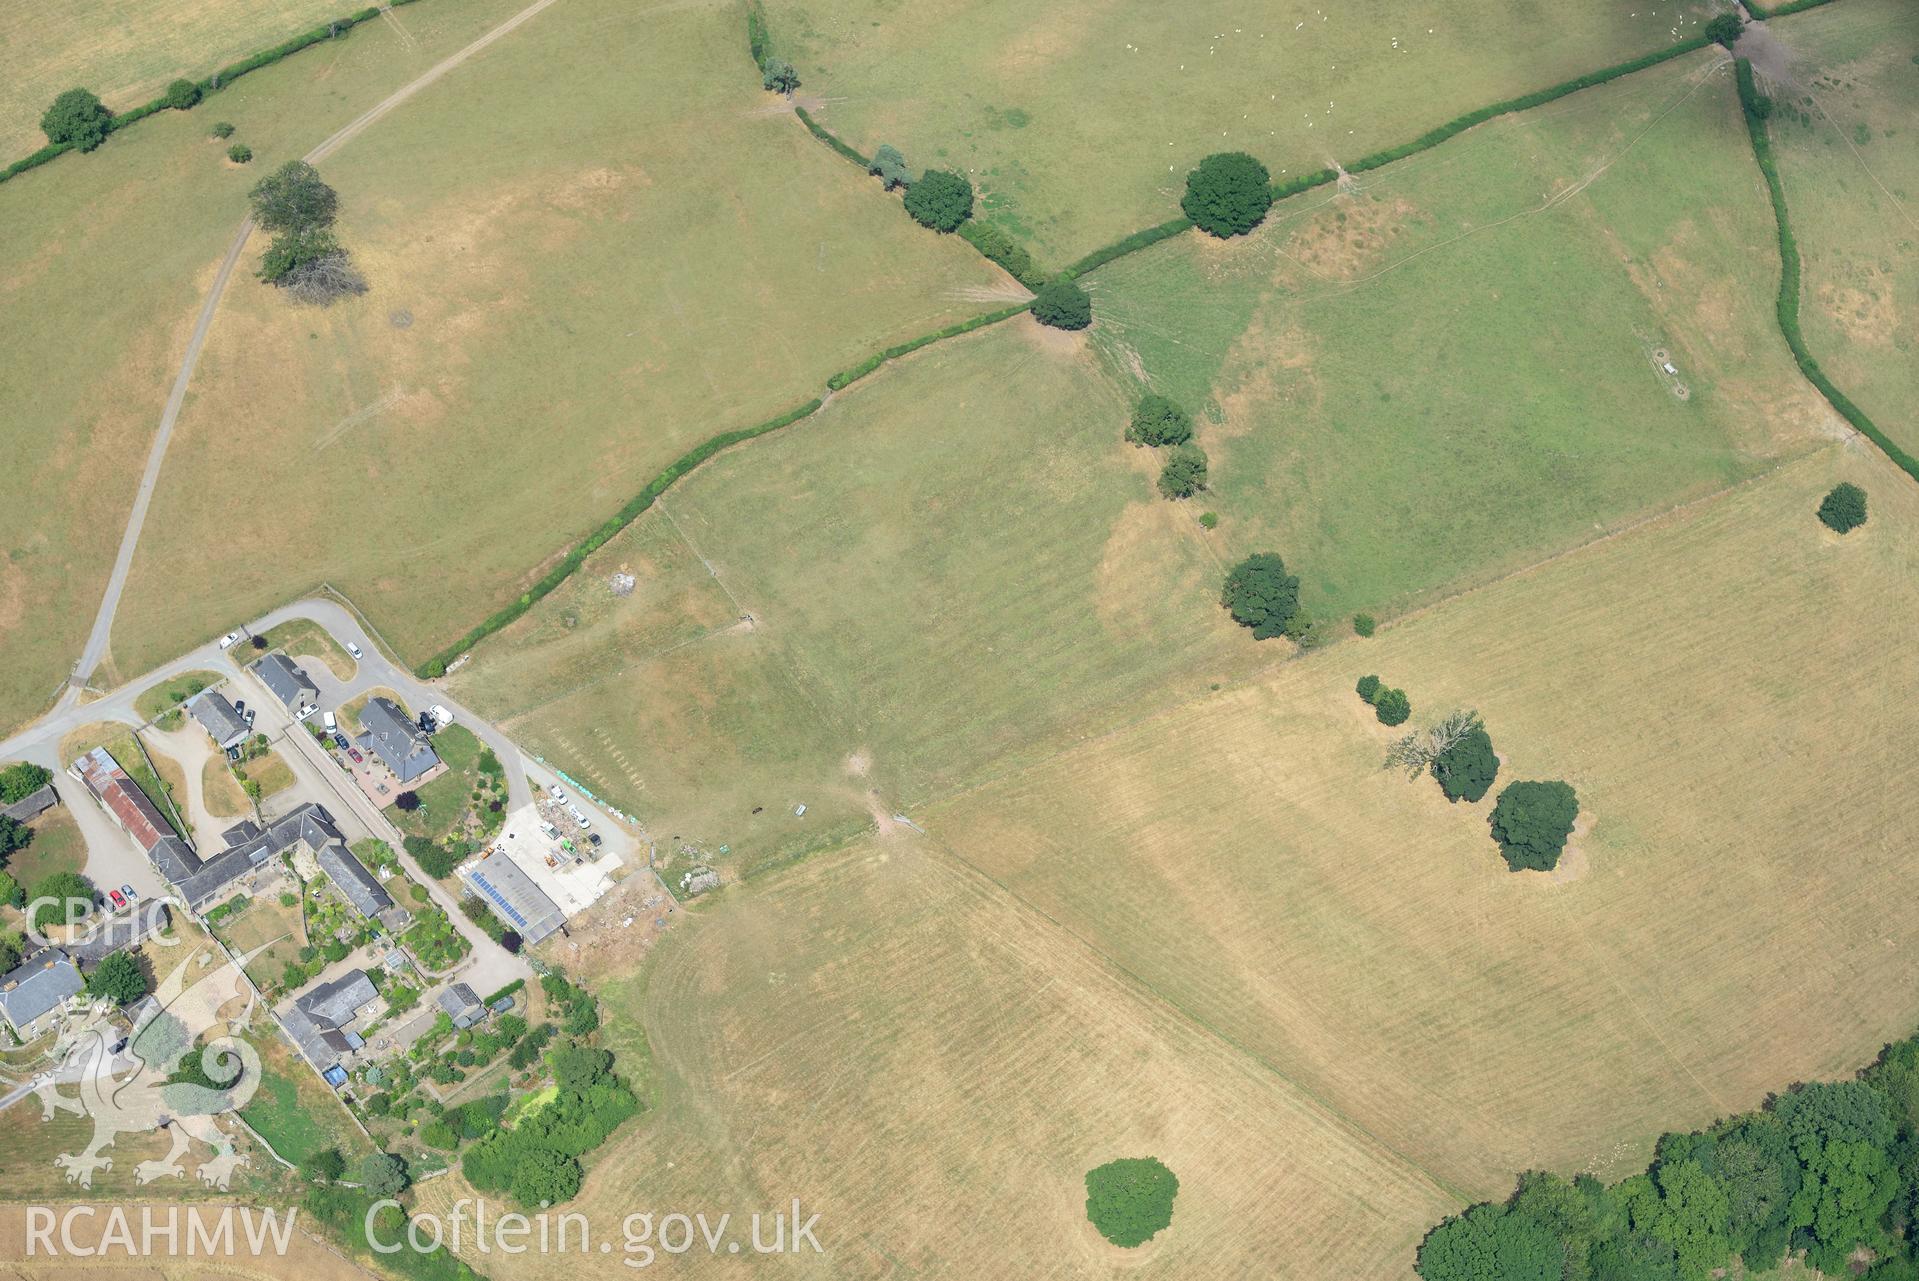 Royal Commission aerial photography of Clyro Roman fort, with parchmarks, taken on 19th July 2018 during the 2018 drought.